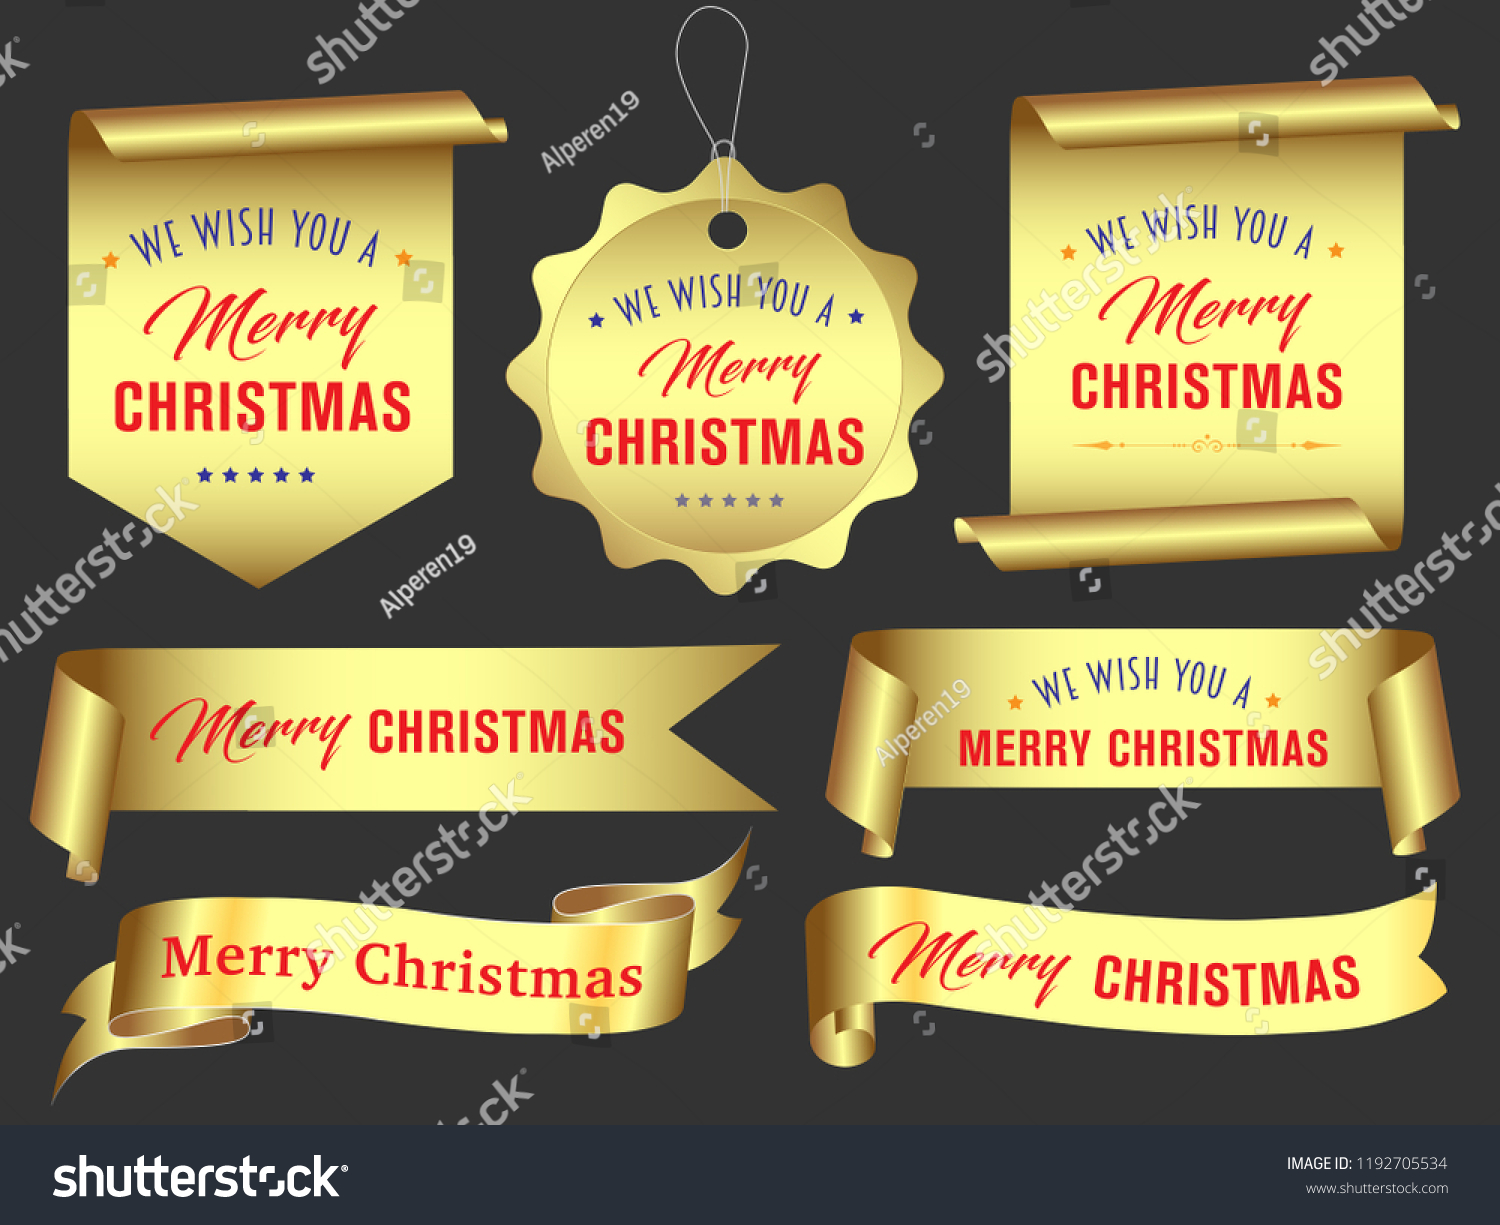 Vector Gold Merry Christmas Ribbon Banners Stock Vector Royalty Free 1192705534 Shutterstock 0918